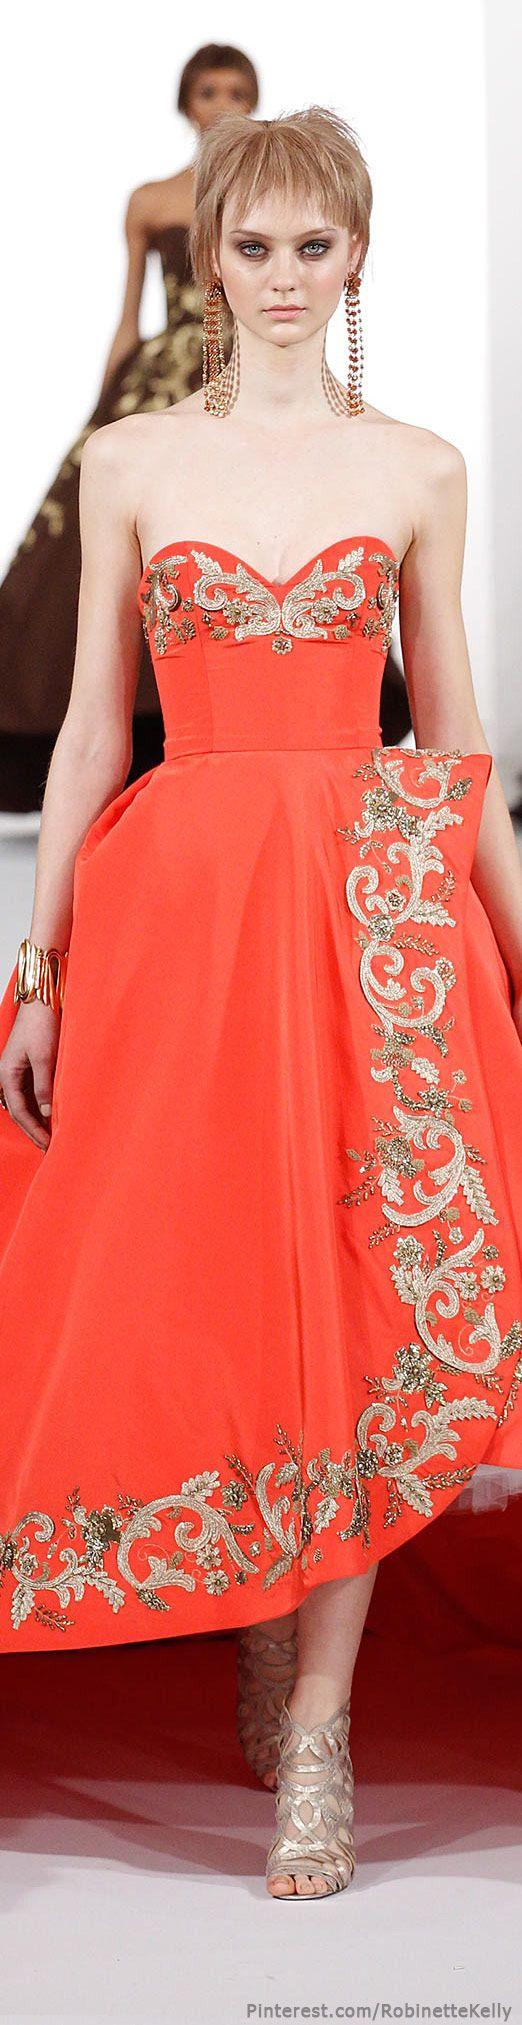 Wedding - Gowns....Orange Obsessions